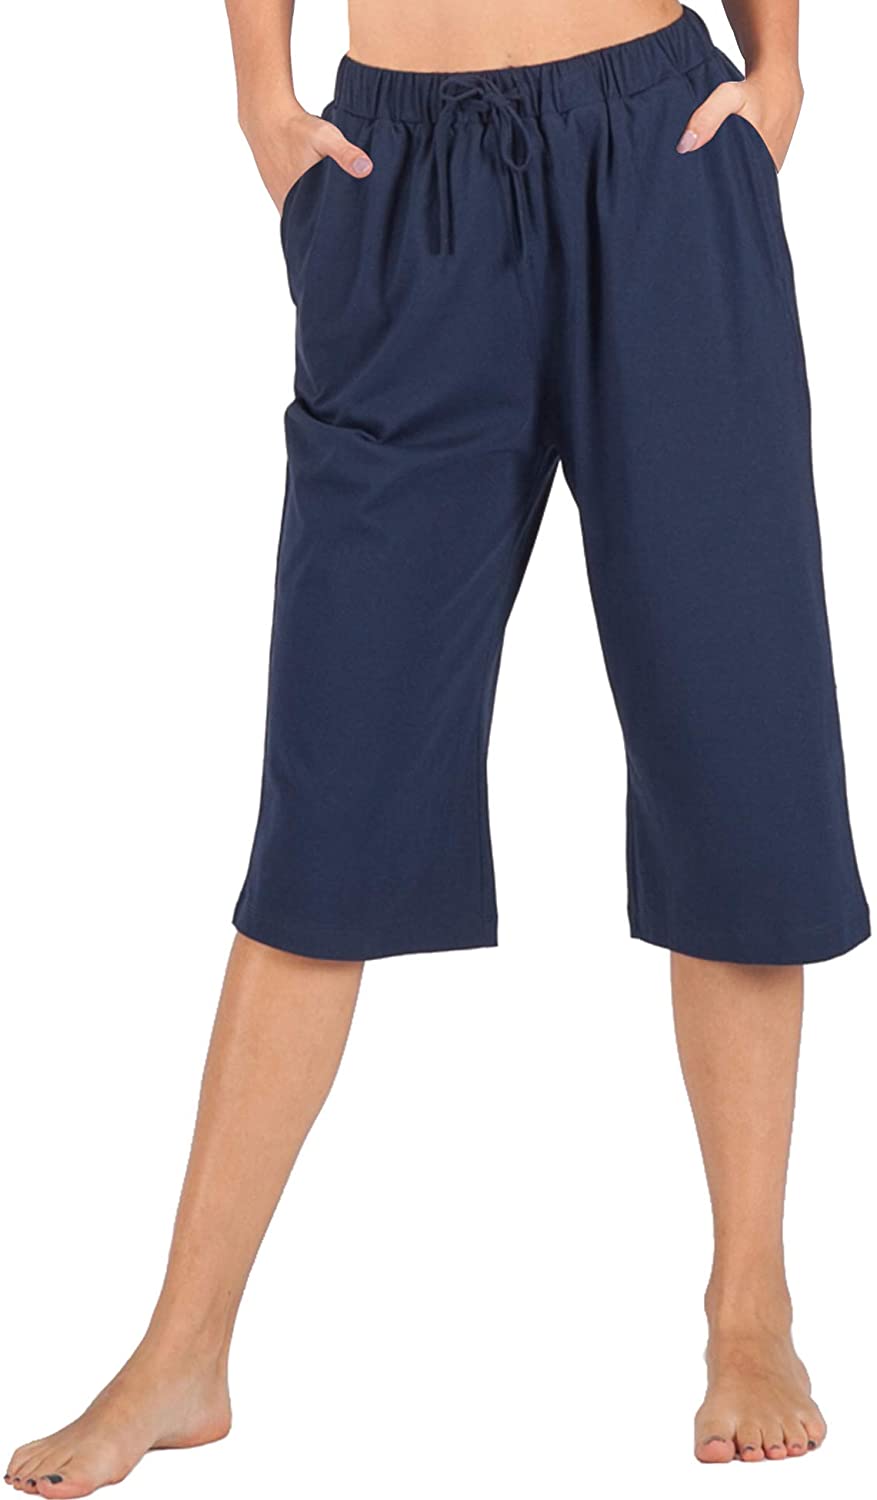 WEWINK CUKOO Pajama Bottoms Women Cotton Stretchy Sleep Lounge Pants with Pockets 